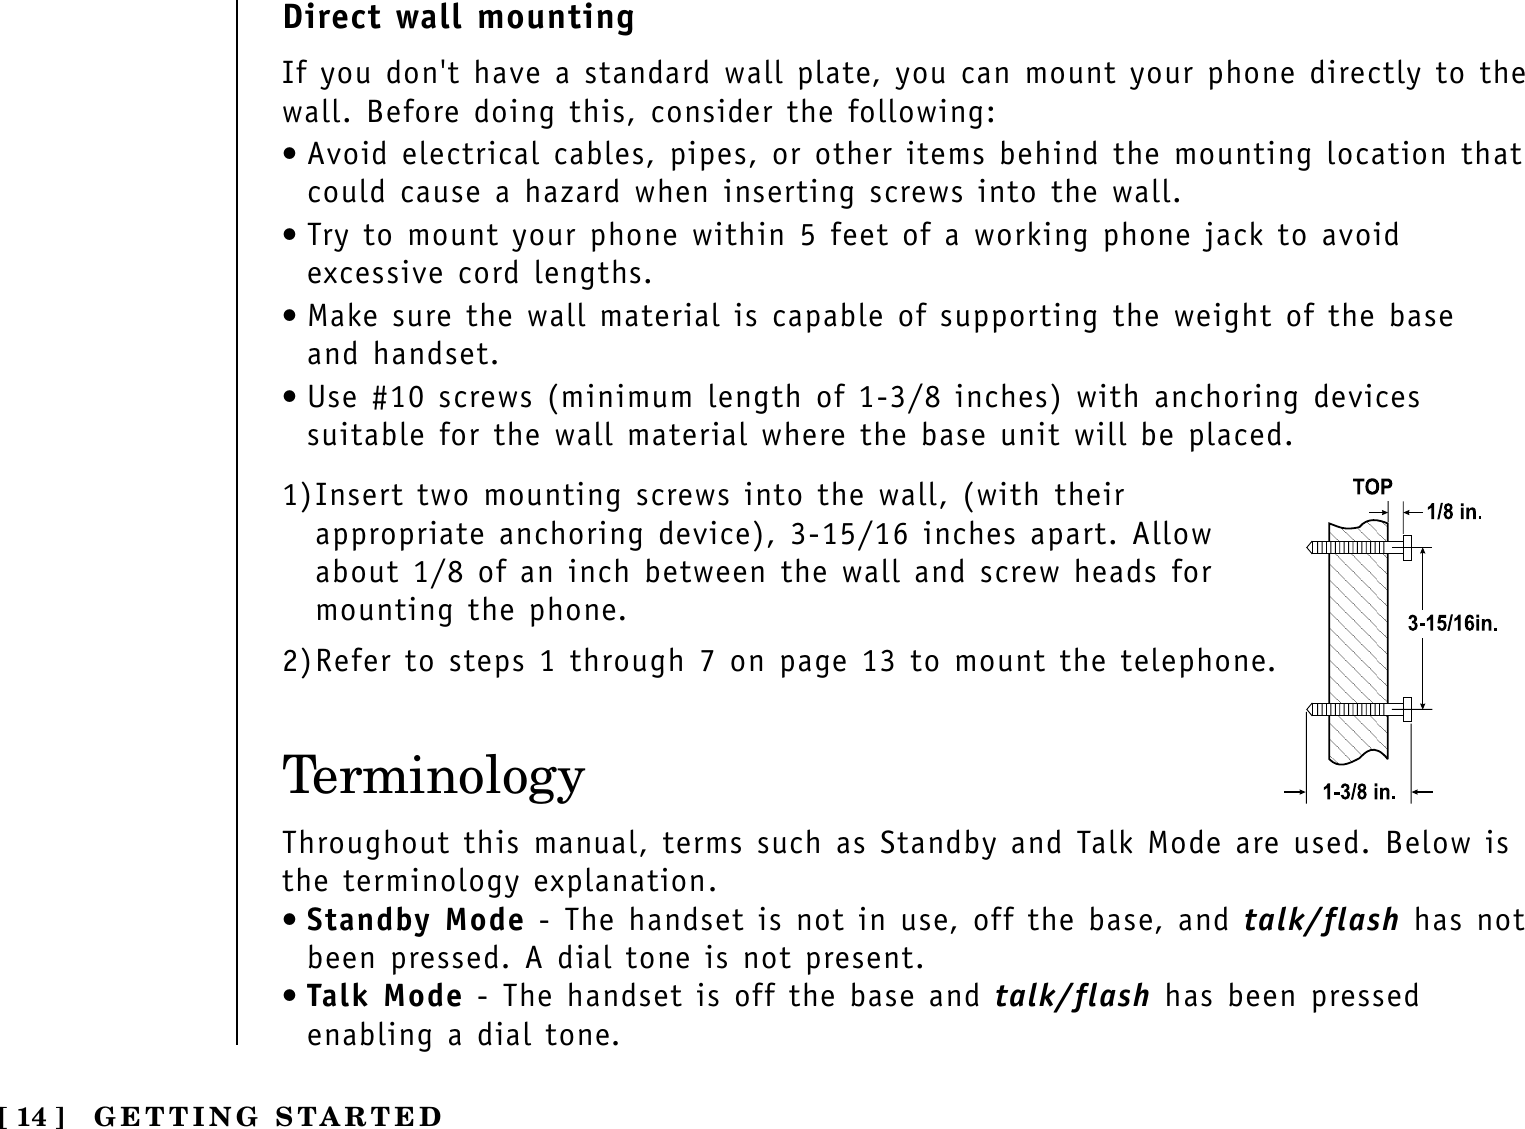 TerminologyThroughout this manual, terms such as Standby and Talk Mode are used. Below isthe terminology explanation.•Standby Mode - The handset is not in use, off the base, and talk/flash has notbeen pressed. A dial tone is not present.•Talk Mode - The handset is off the base and talk/flash has been pressedenabling a dial tone.[ 14 ] GETTING STARTEDDirect wall mountingIf you don&apos;t have a standard wall plate, you can mount your phone directly to thewall. Before doing this, consider the following:•Avoid electrical cables, pipes, or other items behind the mounting location thatcould cause a hazard when inserting screws into the wall.•Try to mount your phone within 5 feet of a working phone jack to avoidexcessive cord lengths.•Make sure the wall material is capable of supporting the weight of the base and handset.•Use #10 screws (minimum length of 1-3/8 inches) with anchoring devicessuitable for the wall material where the base unit will be placed.1)Insert two mounting screws into the wall, (with theirappropriate anchoring device), 3-15/16 inches apart. Allowabout 1/8 of an inch between the wall and screw heads formounting the phone.2)Refer to steps 1 through 7 on page 13 to mount the telephone.